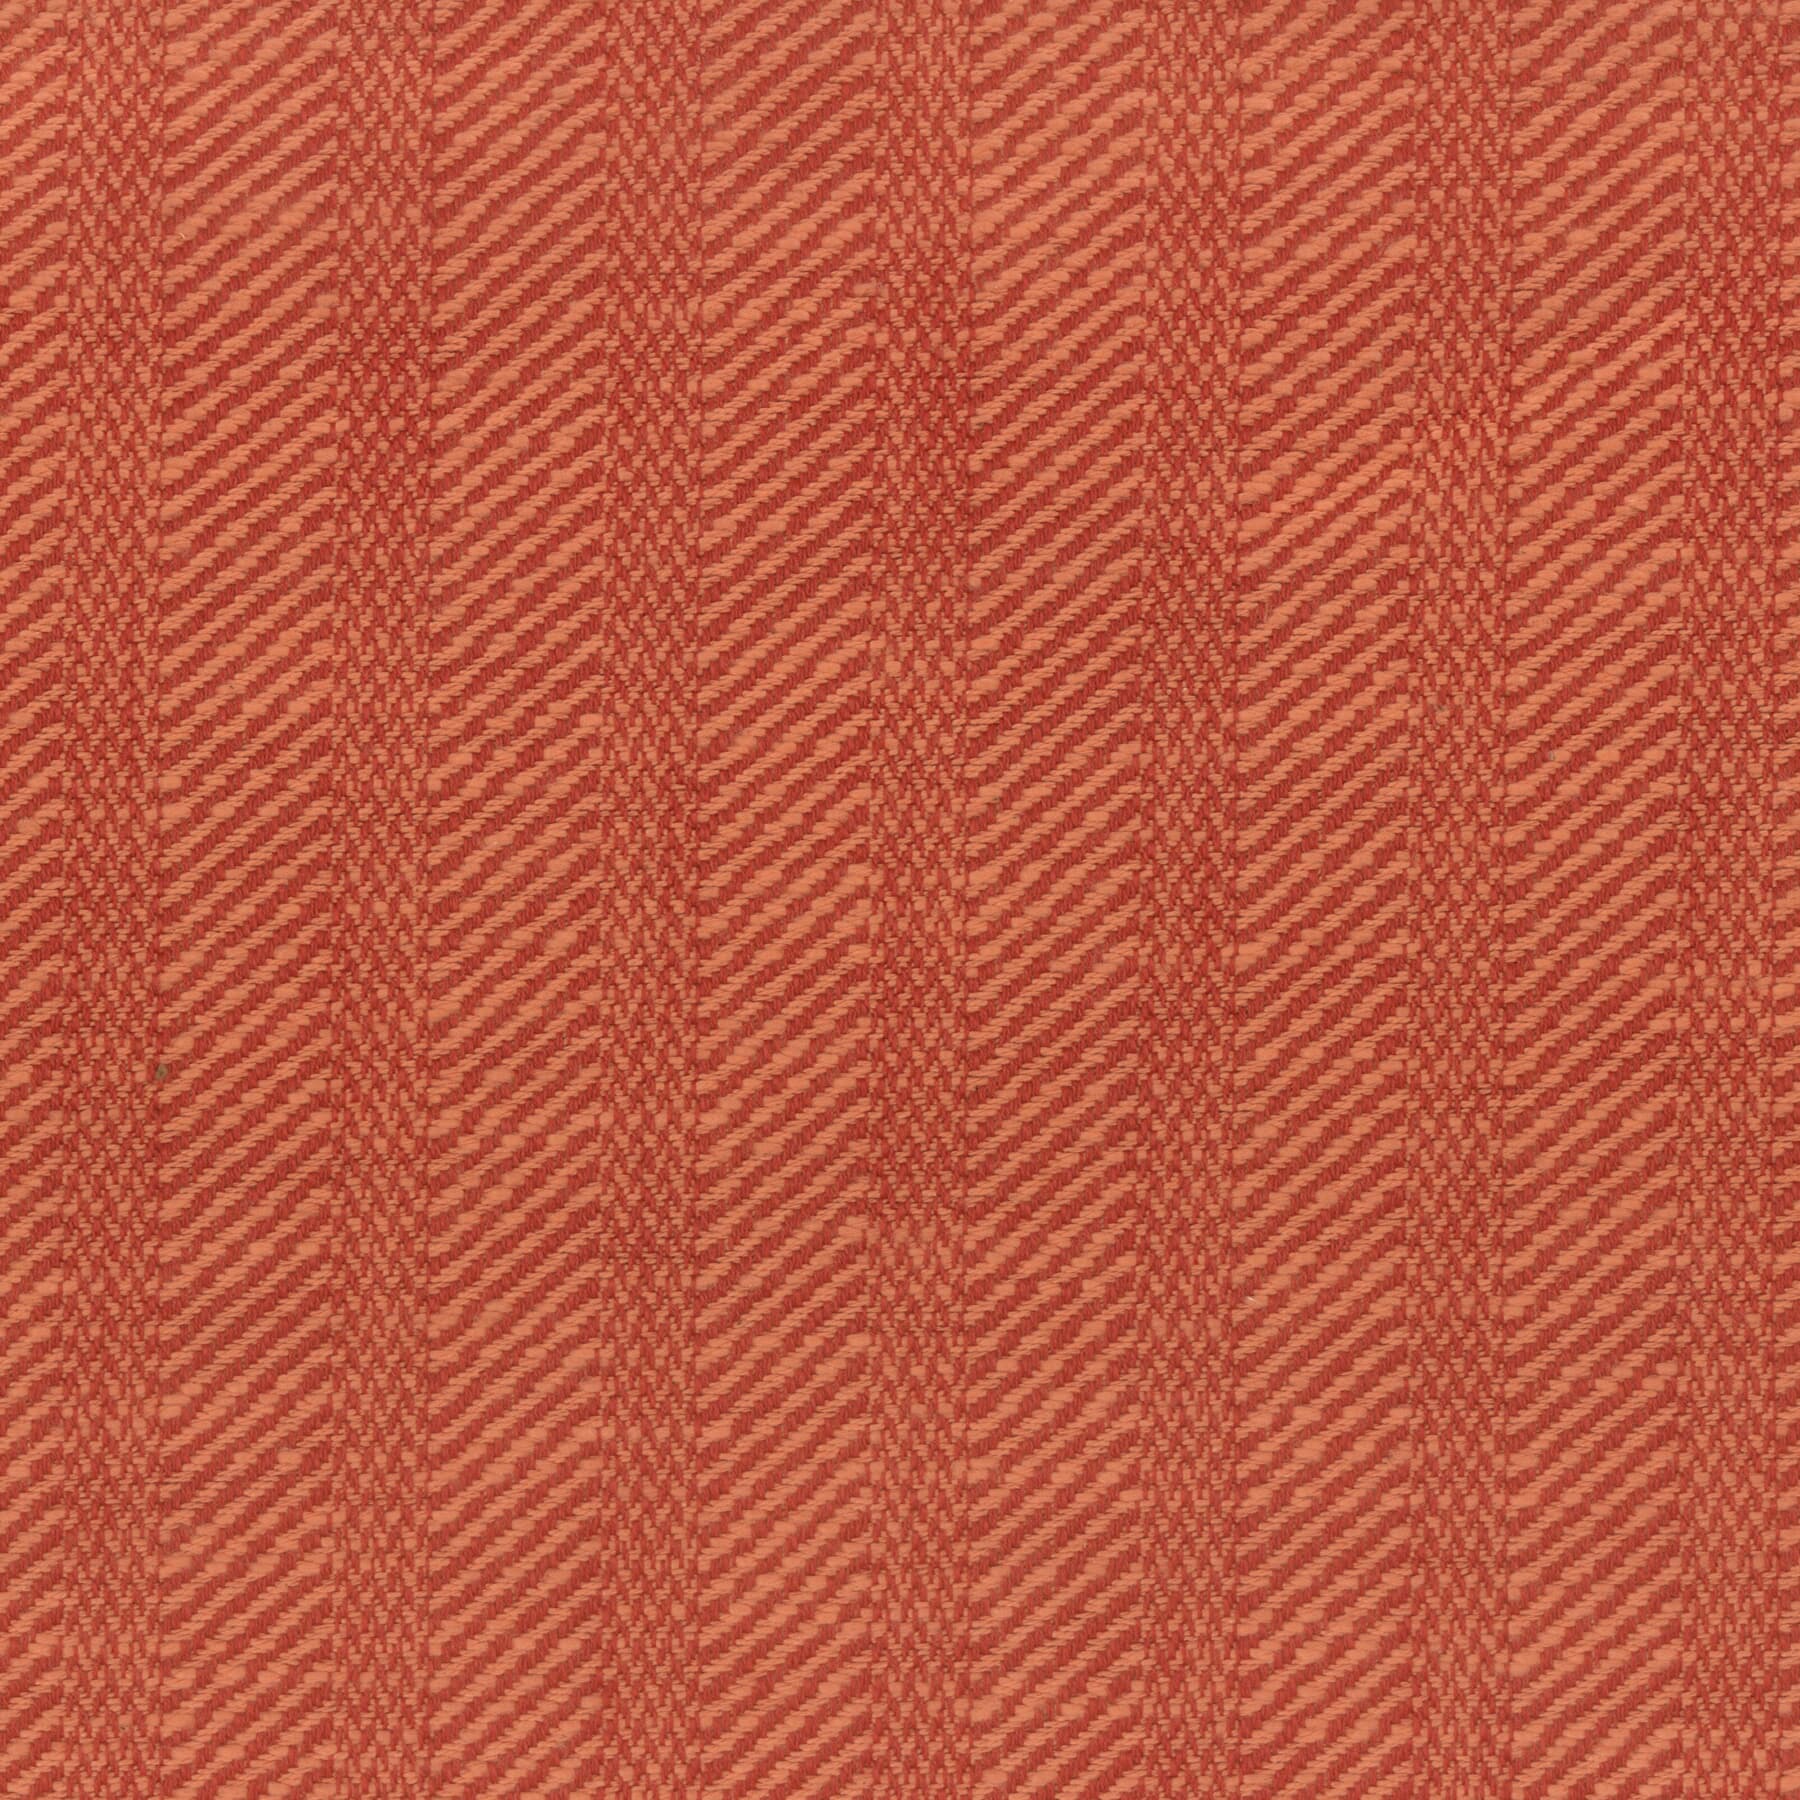 7650-20 Textured Stripe by Stout Fabric